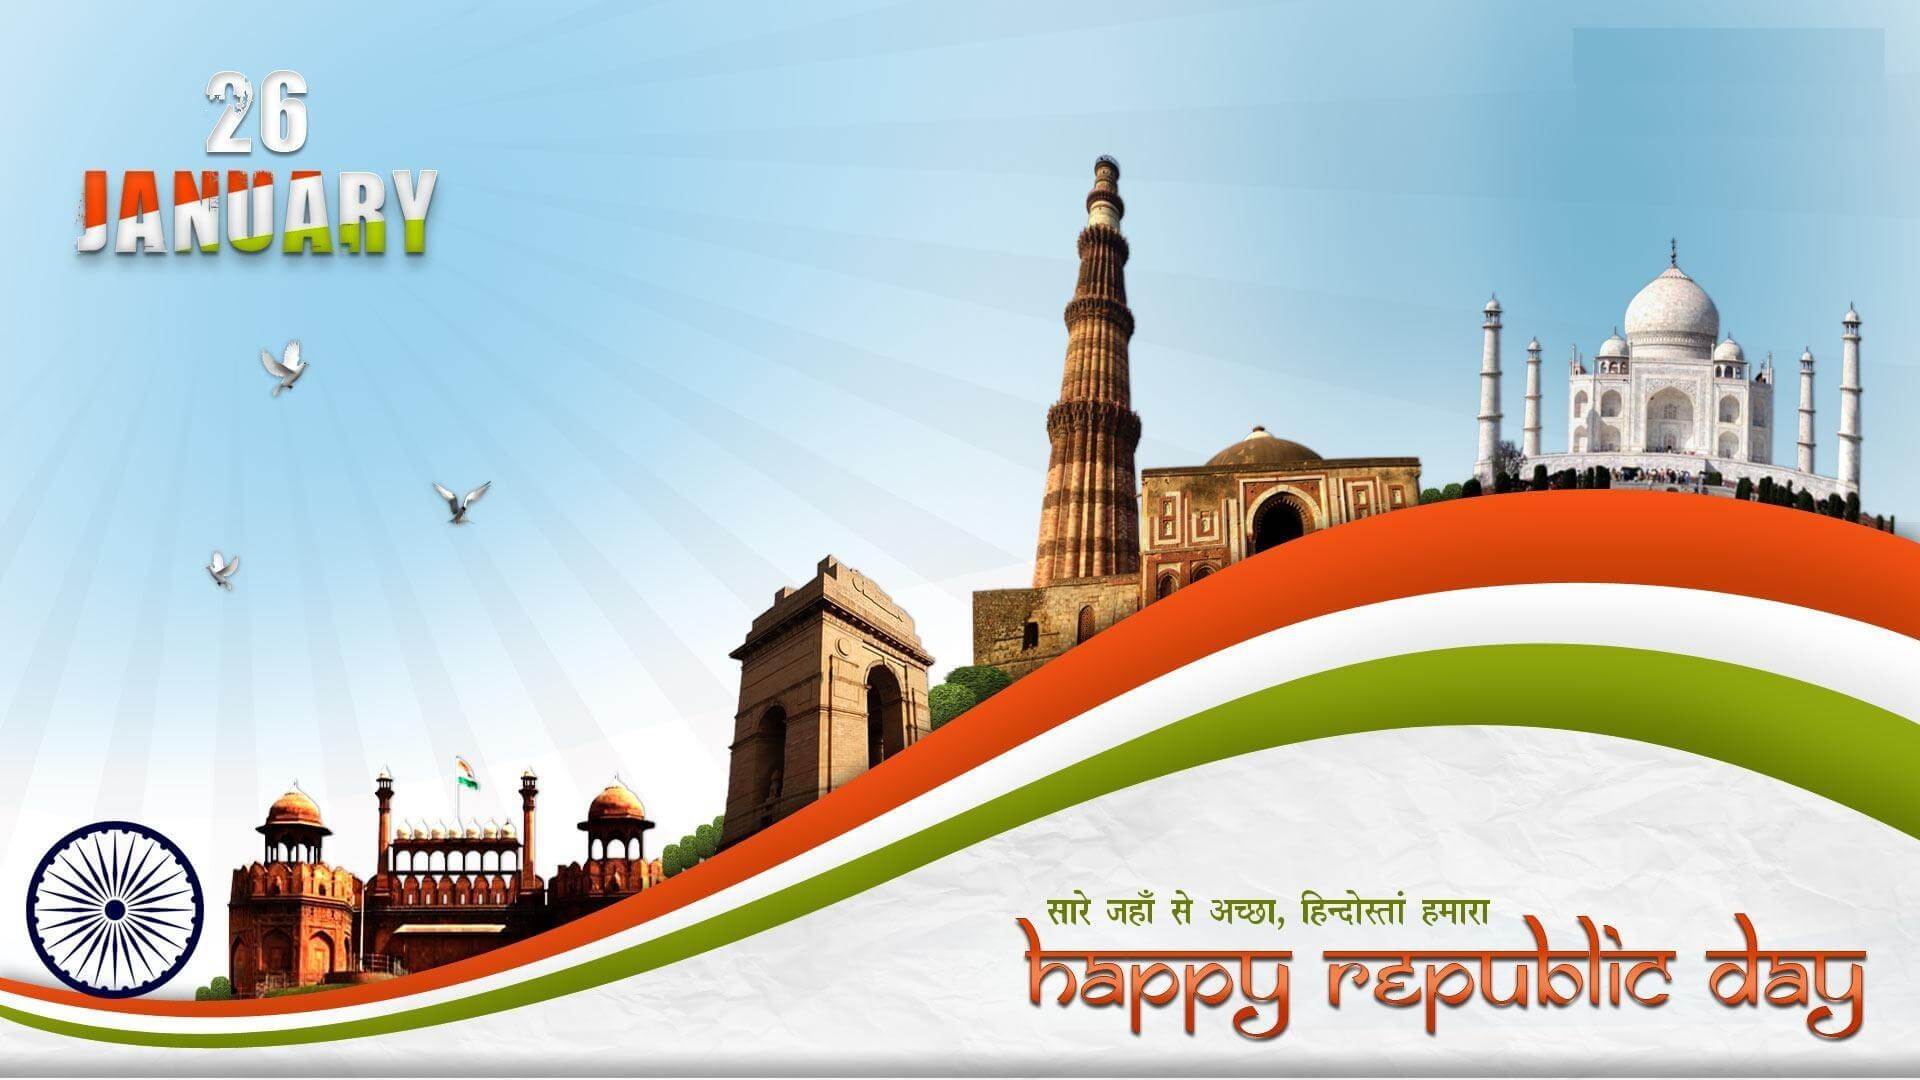 Happy Republic Day Image and Photo Collection 2021